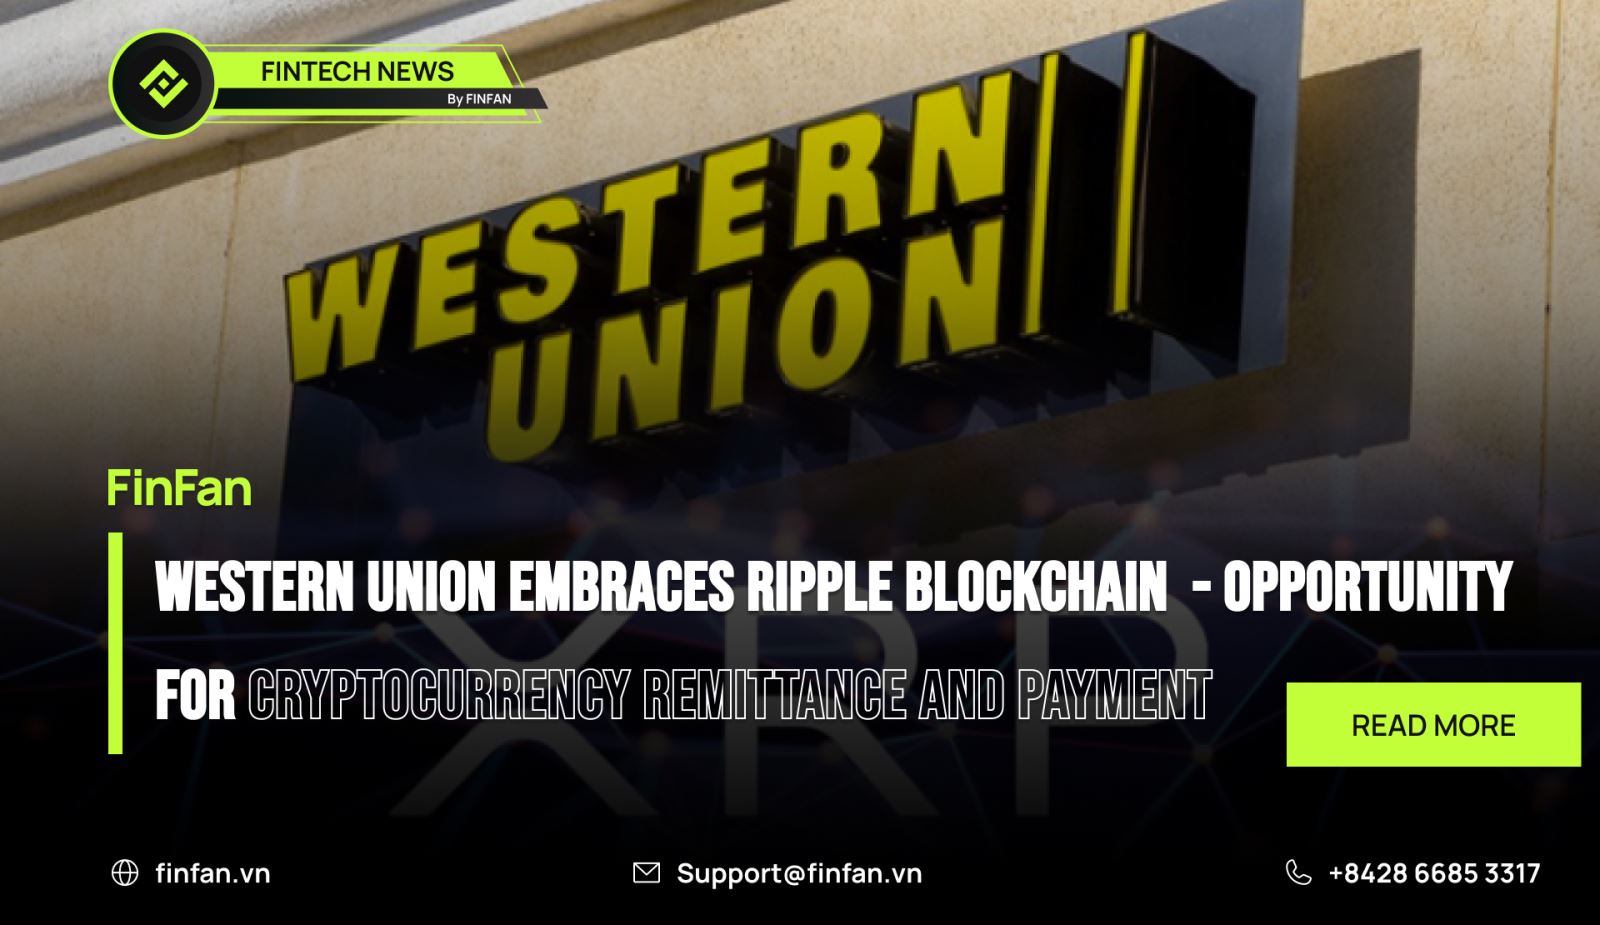 Western Union Embraces Ripple Blockchain  - Opportunity for Cryptocurrency Remittance and Payment